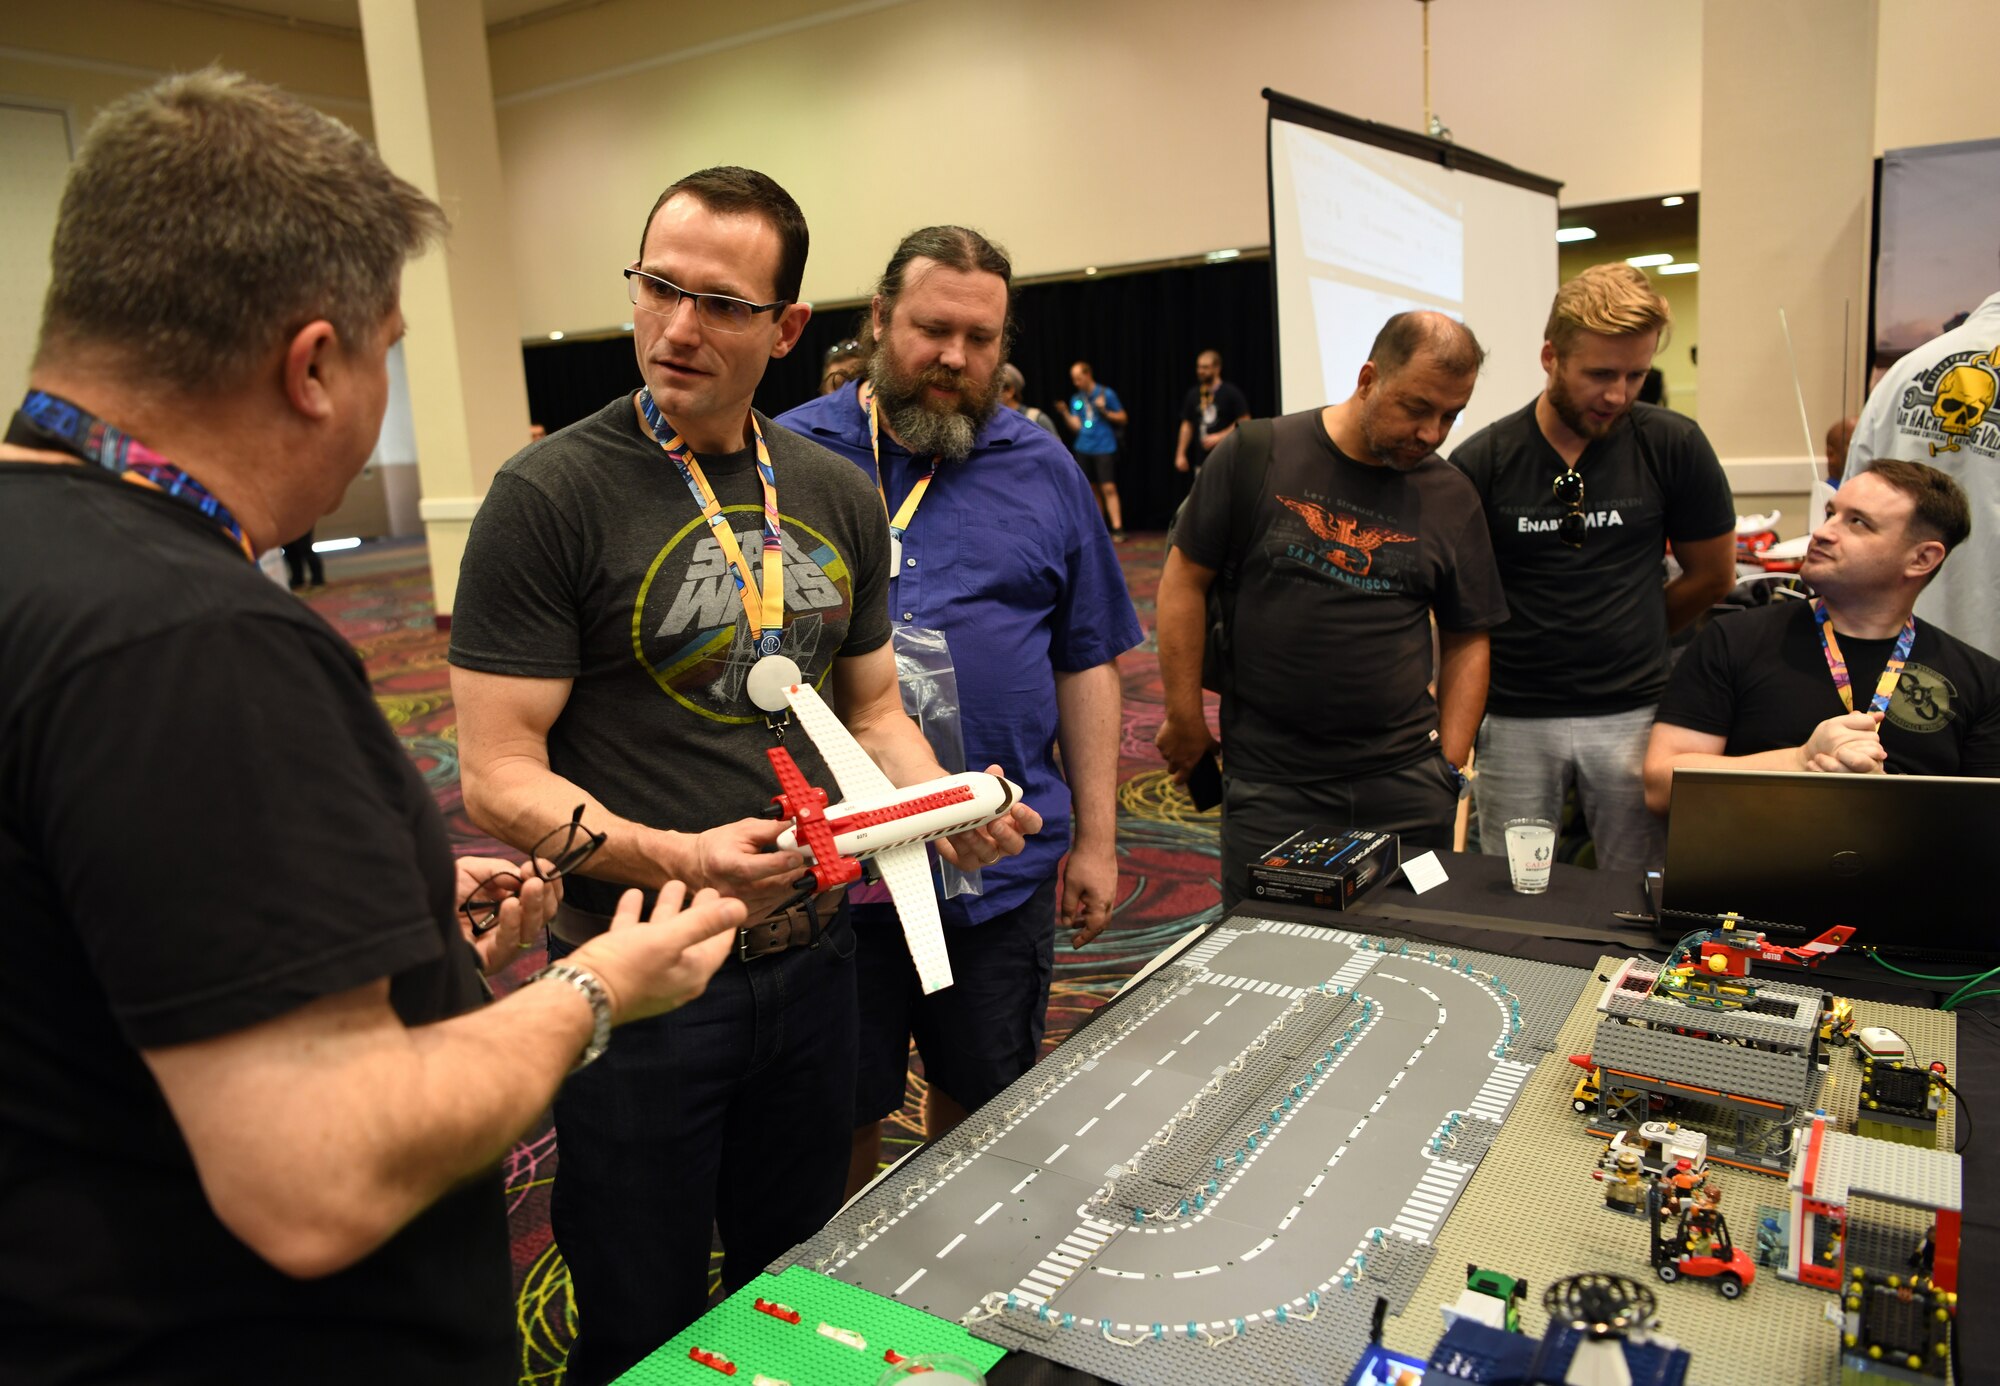 Scott Thompson, 90th Cyberspace Operations Squadron, systems engineer, hosts Dr. Will Roper, Assistant Secretary of the Air Force for Acquisition, Technology and Logistics, for a “Bricks in the Loop” presentation at DEF CON 27 Hacking Conference in Las Vegas, Aug. 9, 2019. “Bricks in the Loop” mimics an Air Force installation to simulate real-world cyber systems in training cyber operators. (U.S. Air Force photo by Tech. Sgt. R.J. Biermann)